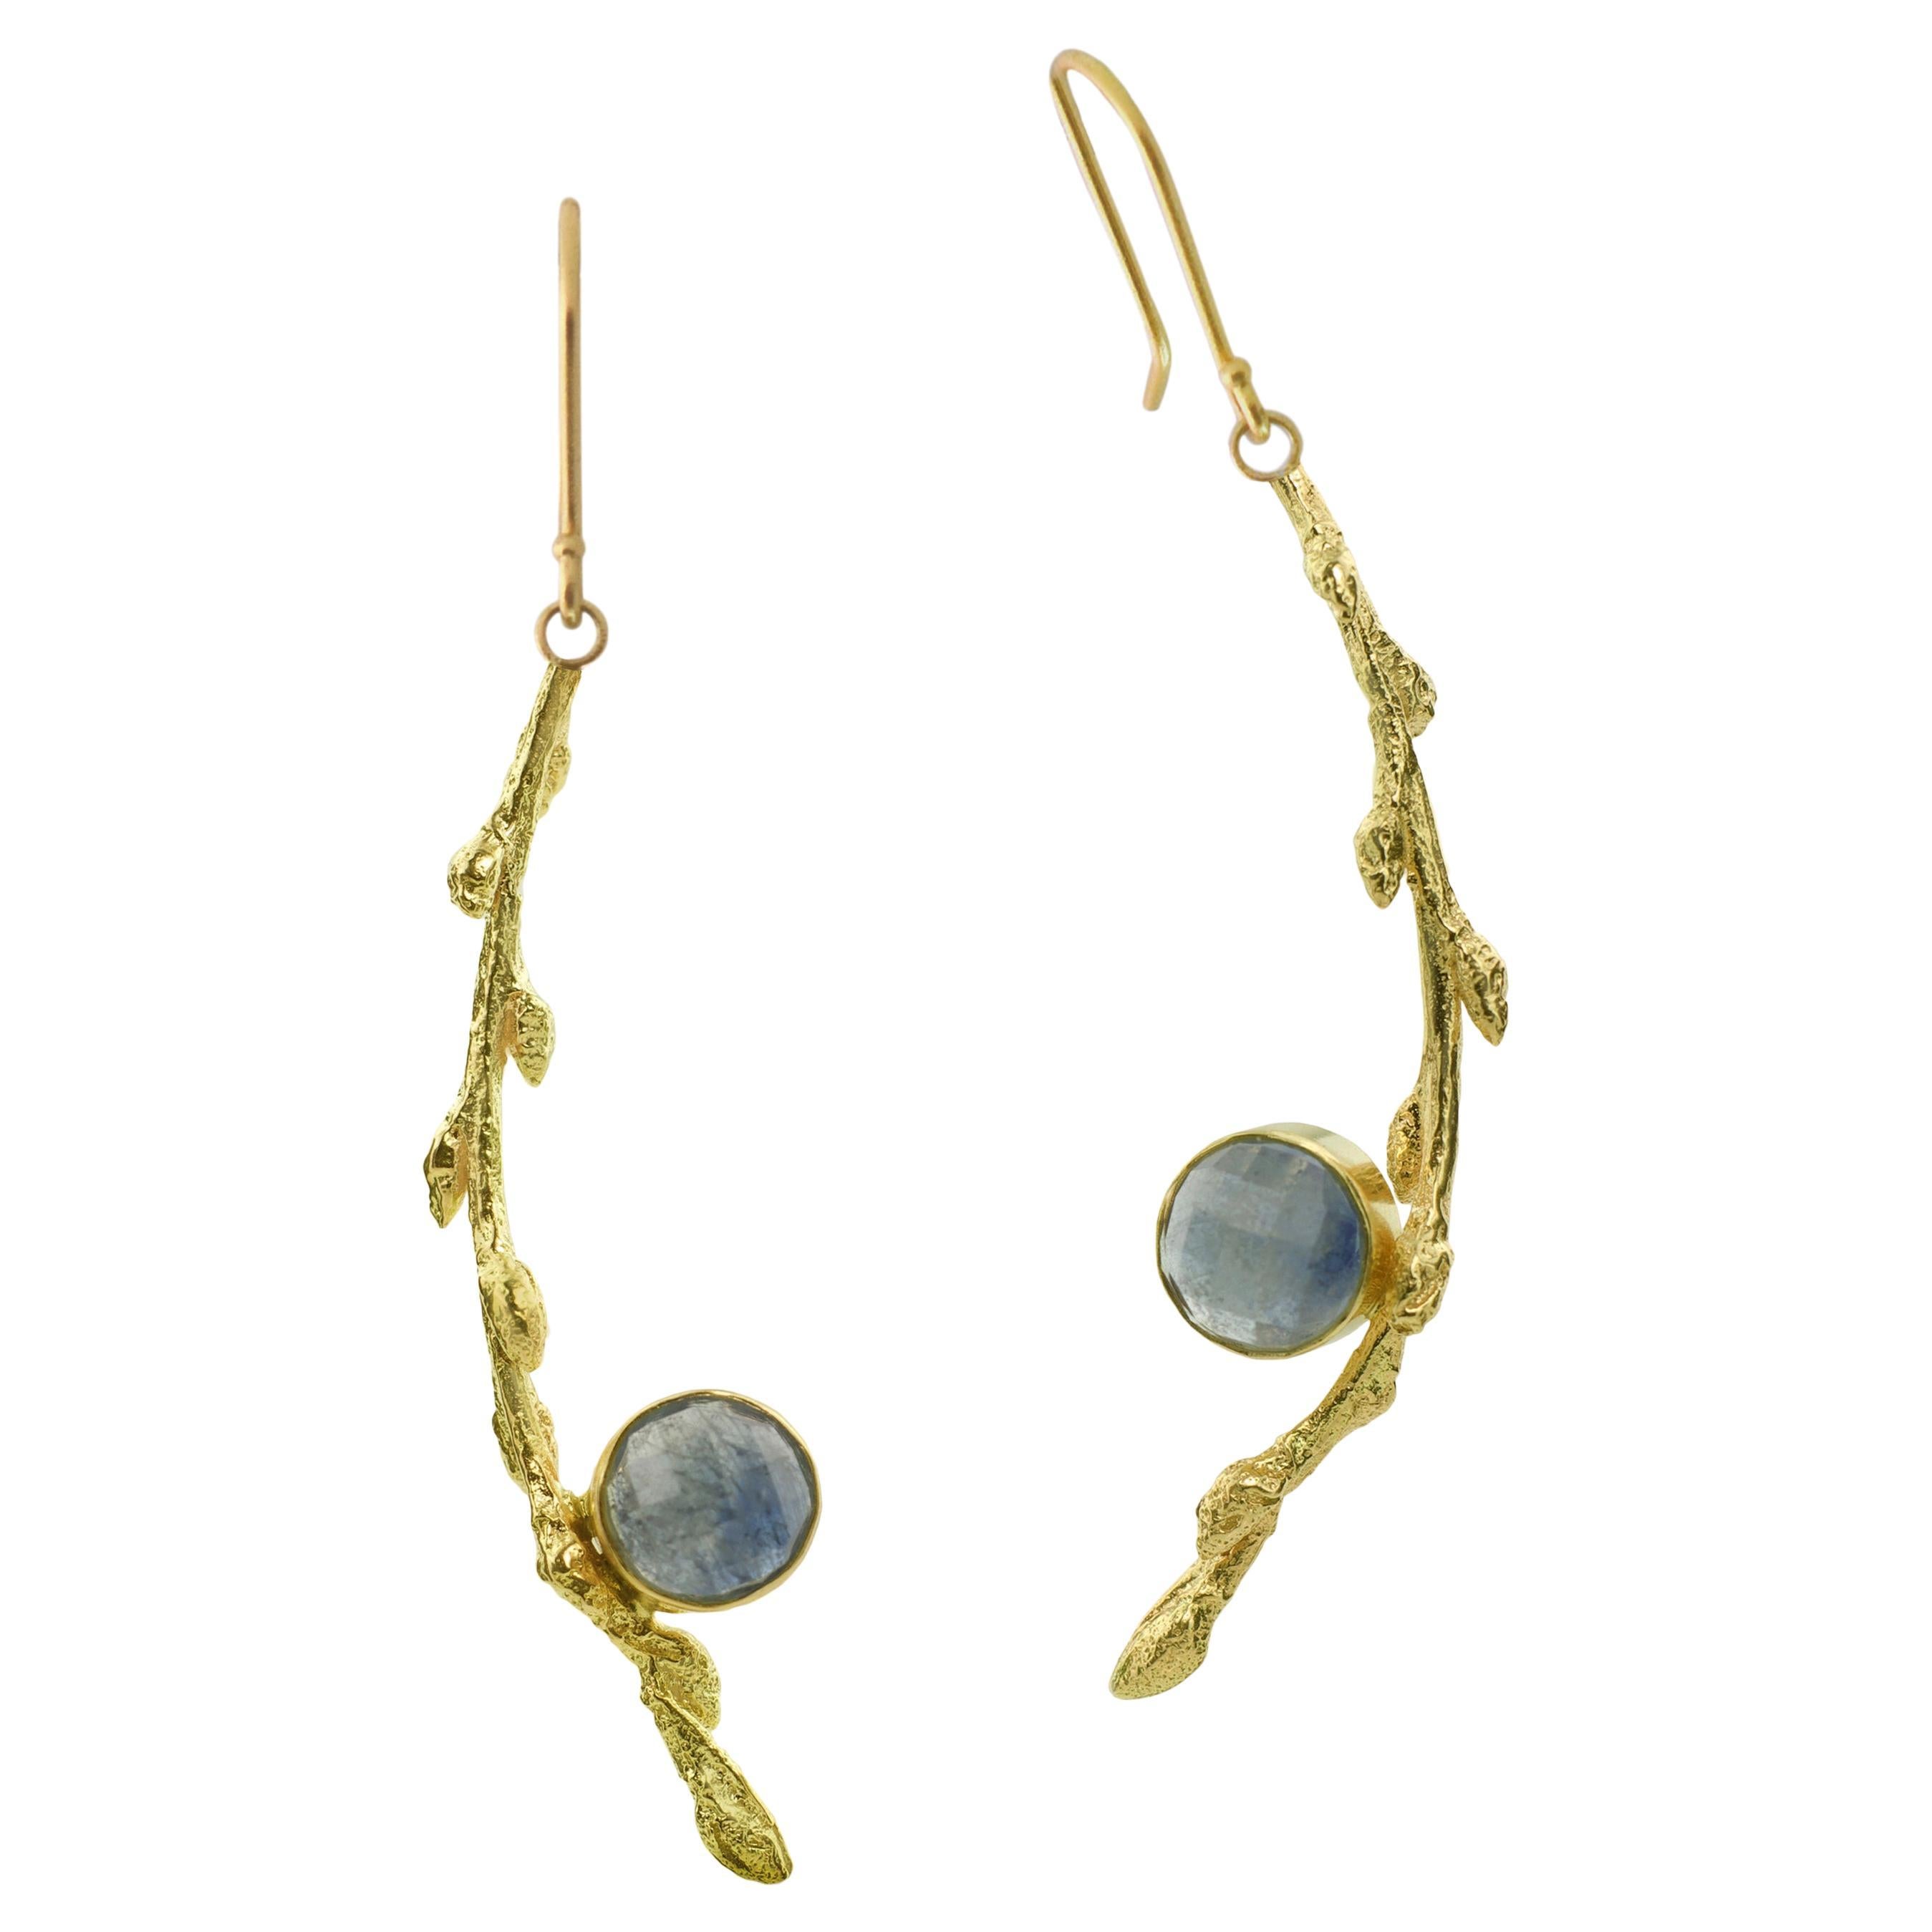 Susan Crow Studio Rose Cut Sapphires and Yellow Gold Branch Earrings For Sale